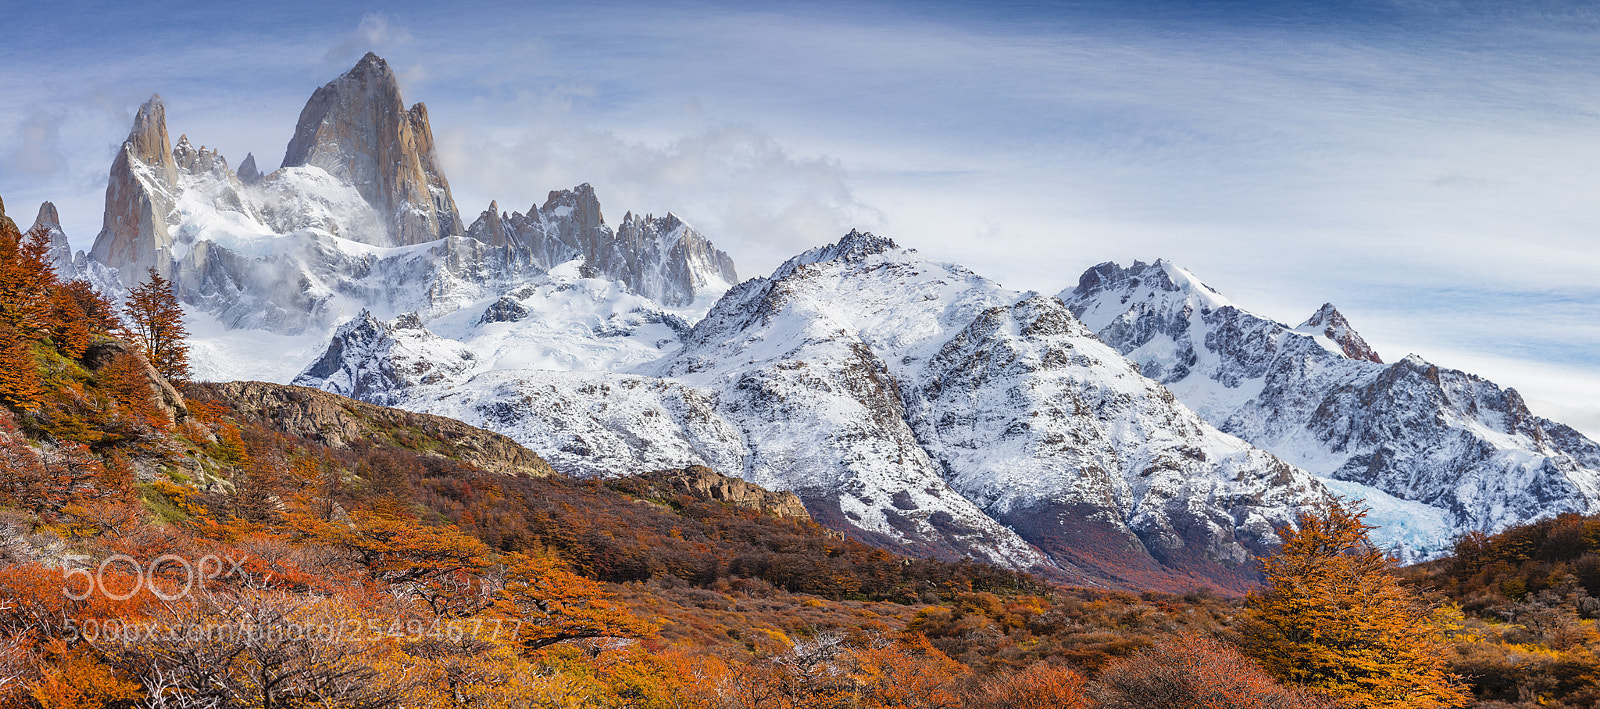 Canon EOS 5DS R sample photo. Pano - fitz roy photography